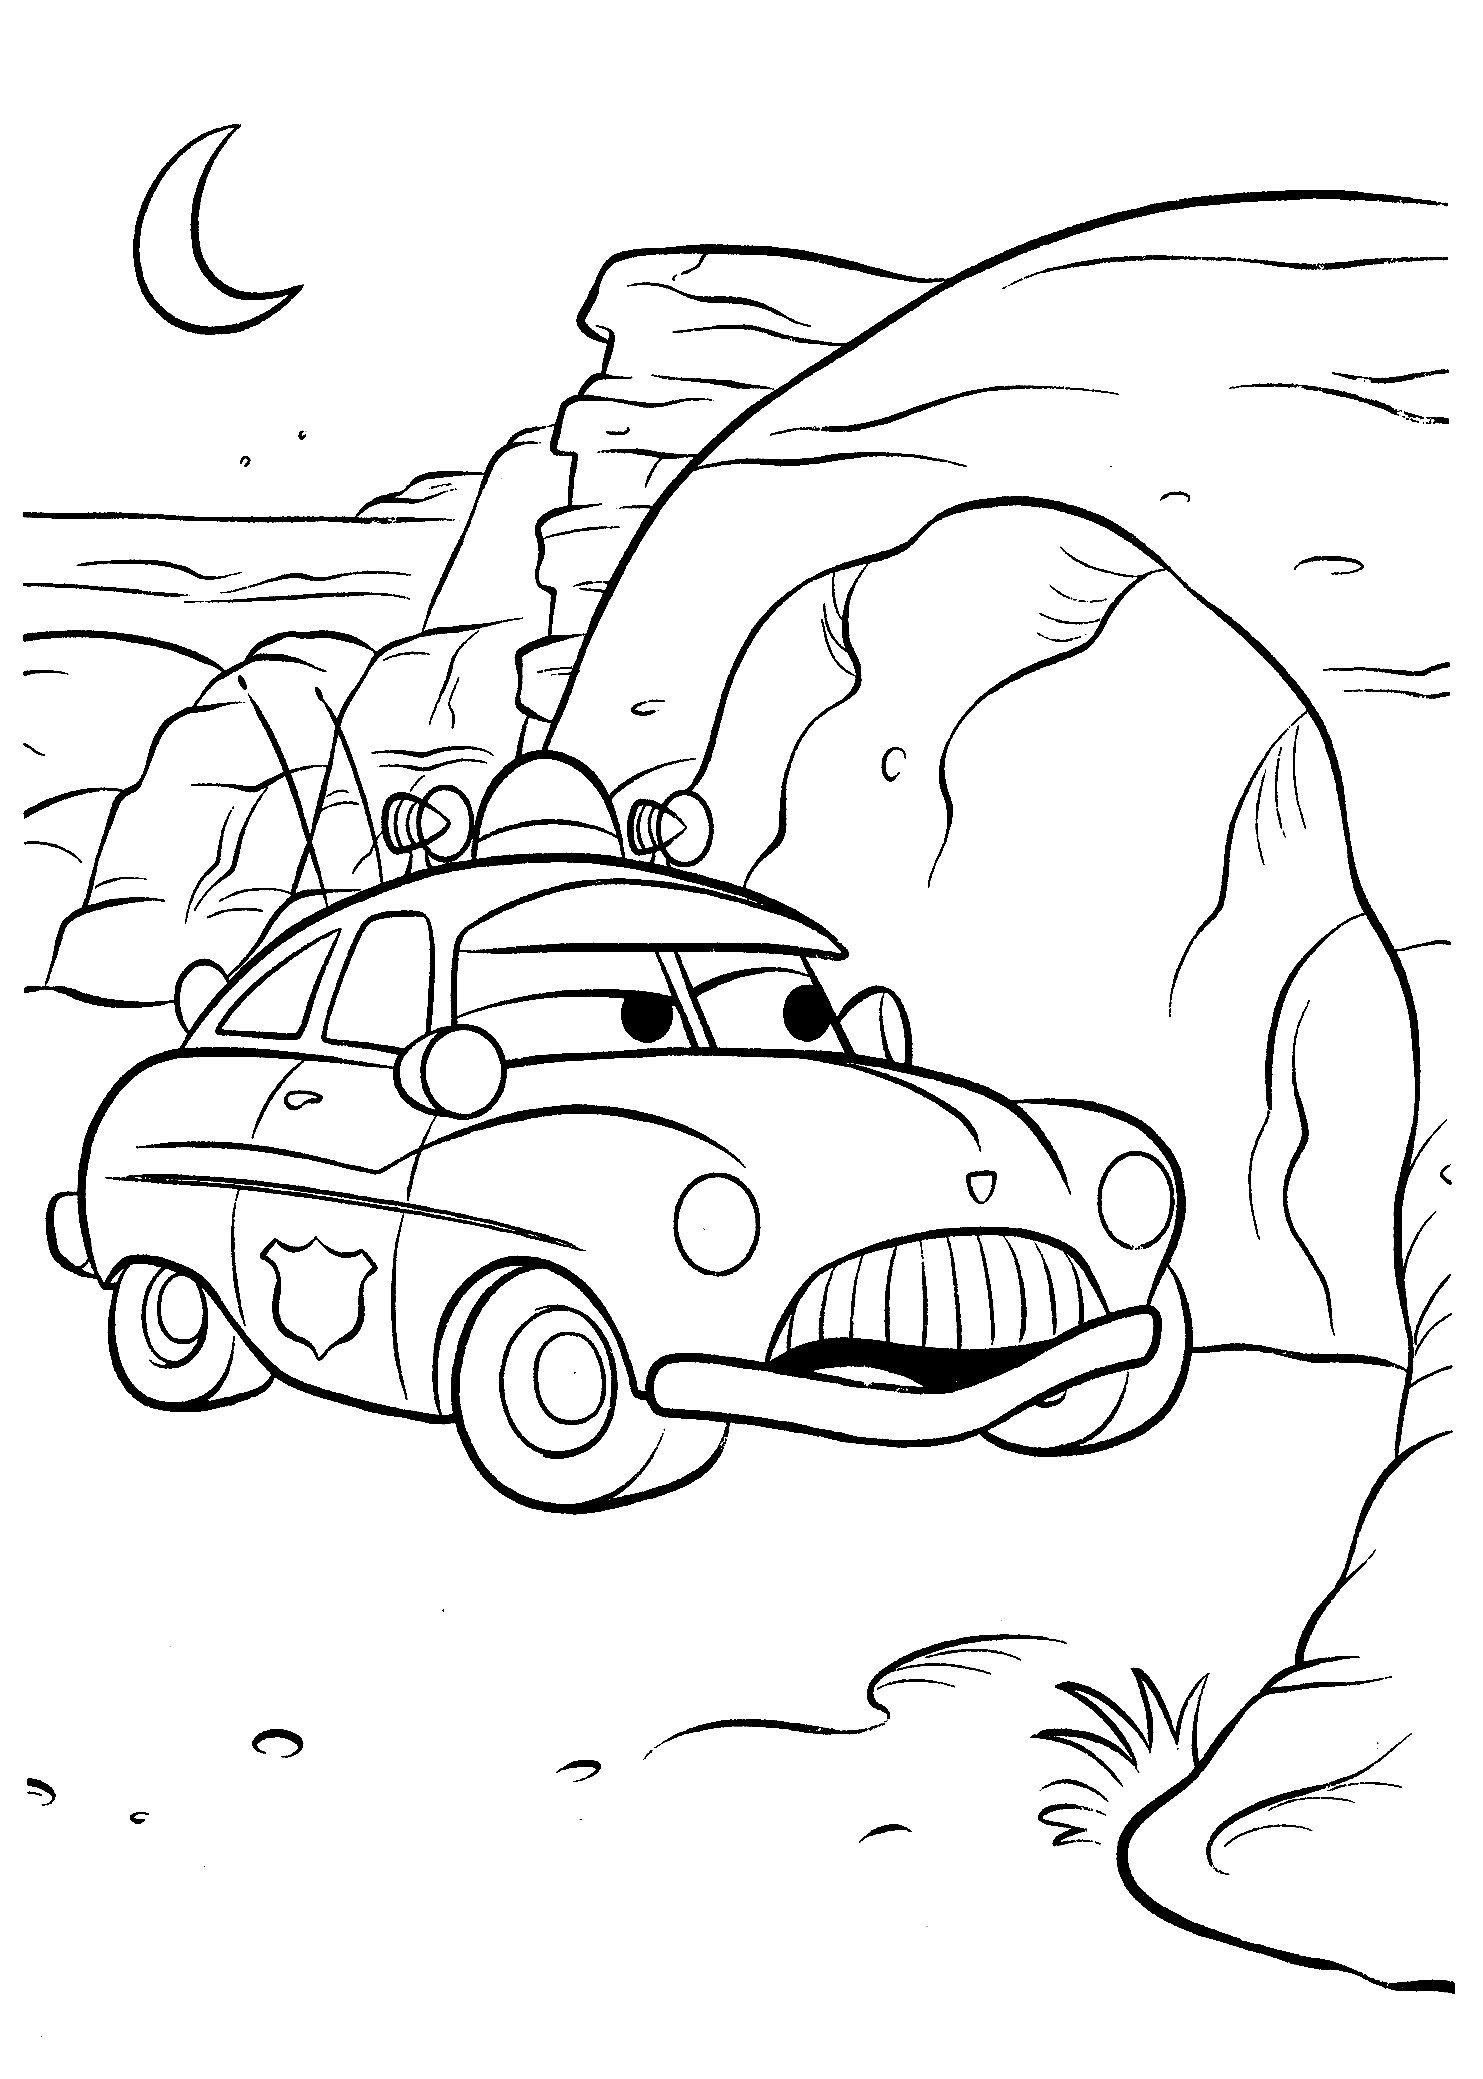 30+ Pretty Image of Lightning Mcqueen Coloring Pages ...